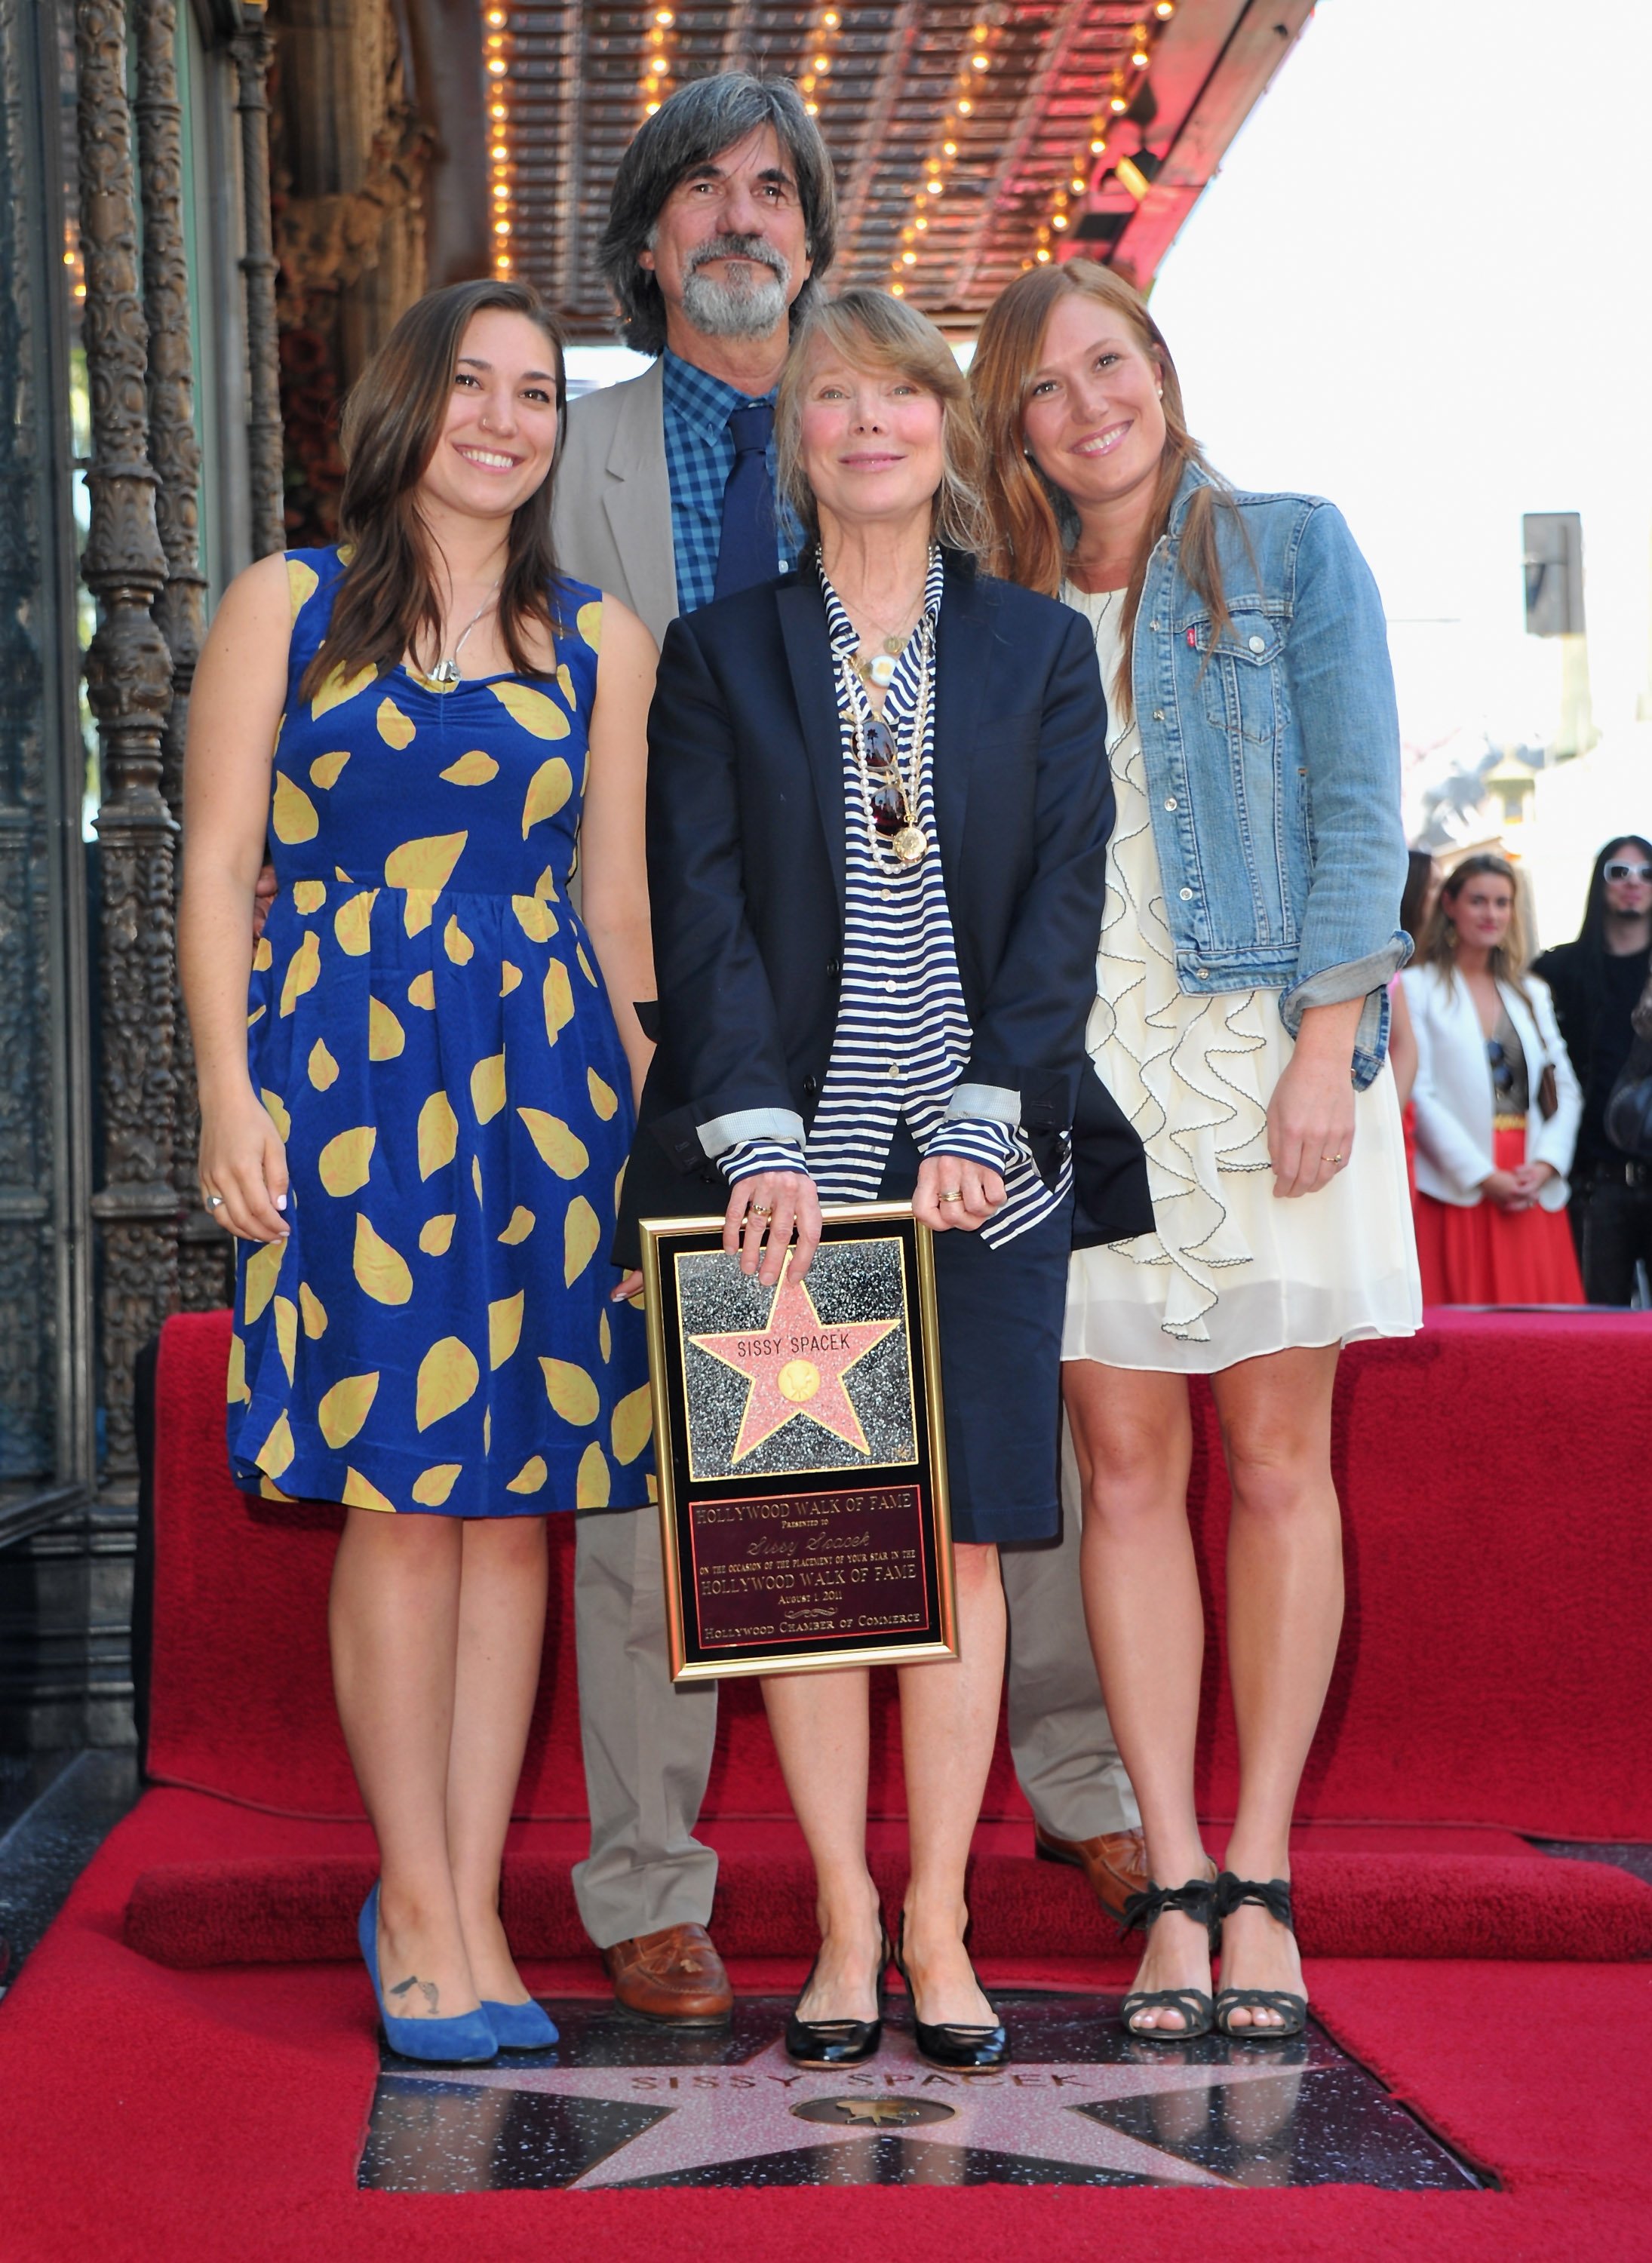 Sissy Spacek and her family on August 1, 2011, in Hollywood, California. | Source: Getty Images